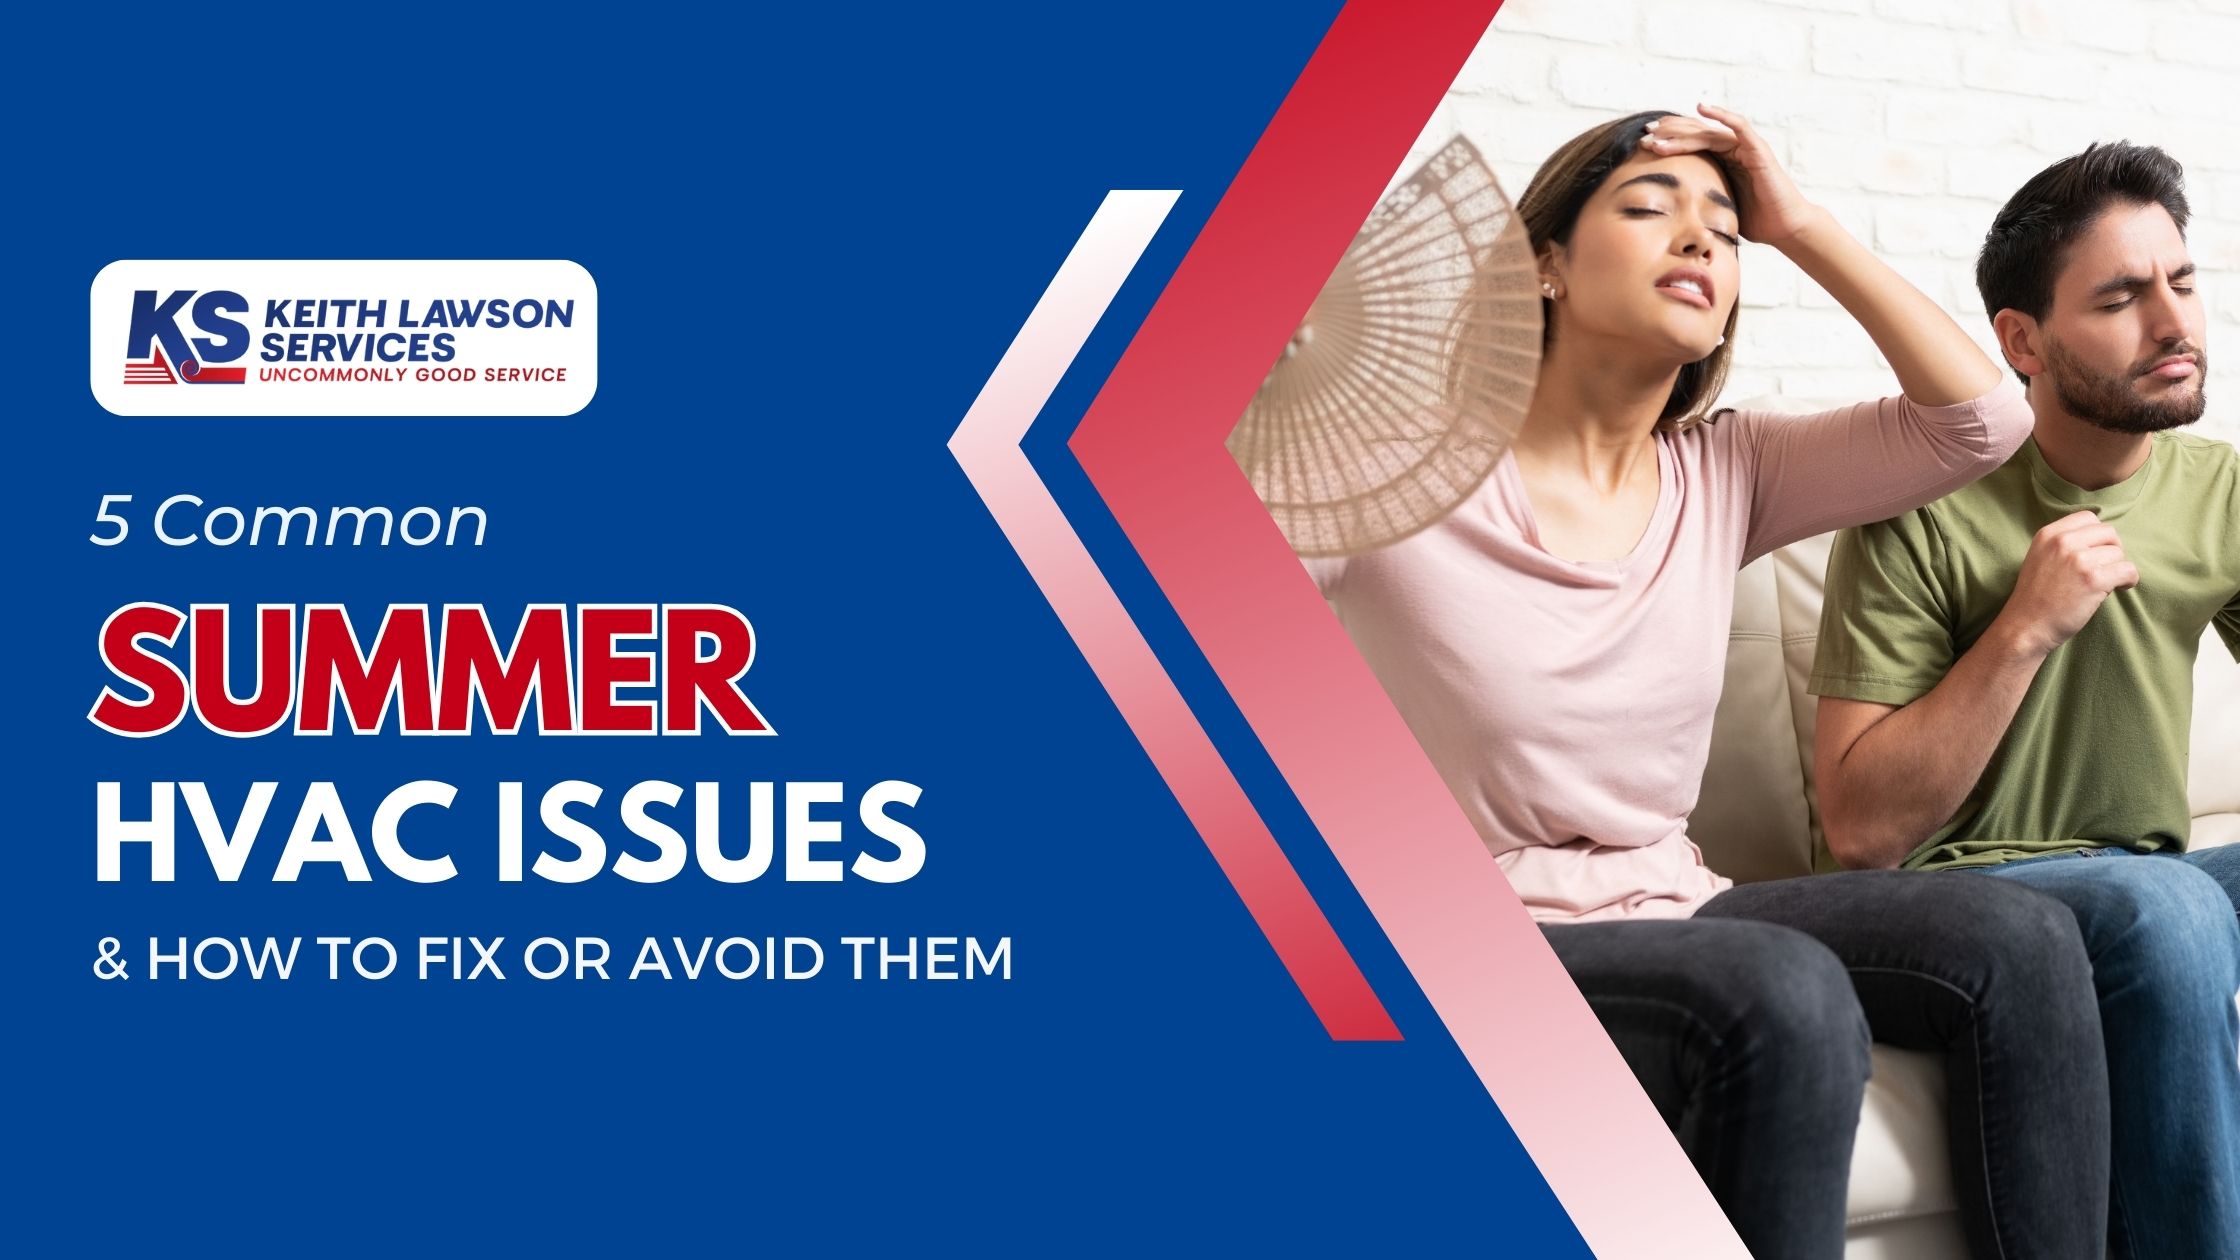 Common Summer HVAC Issues & How to Avoid or Fix Them